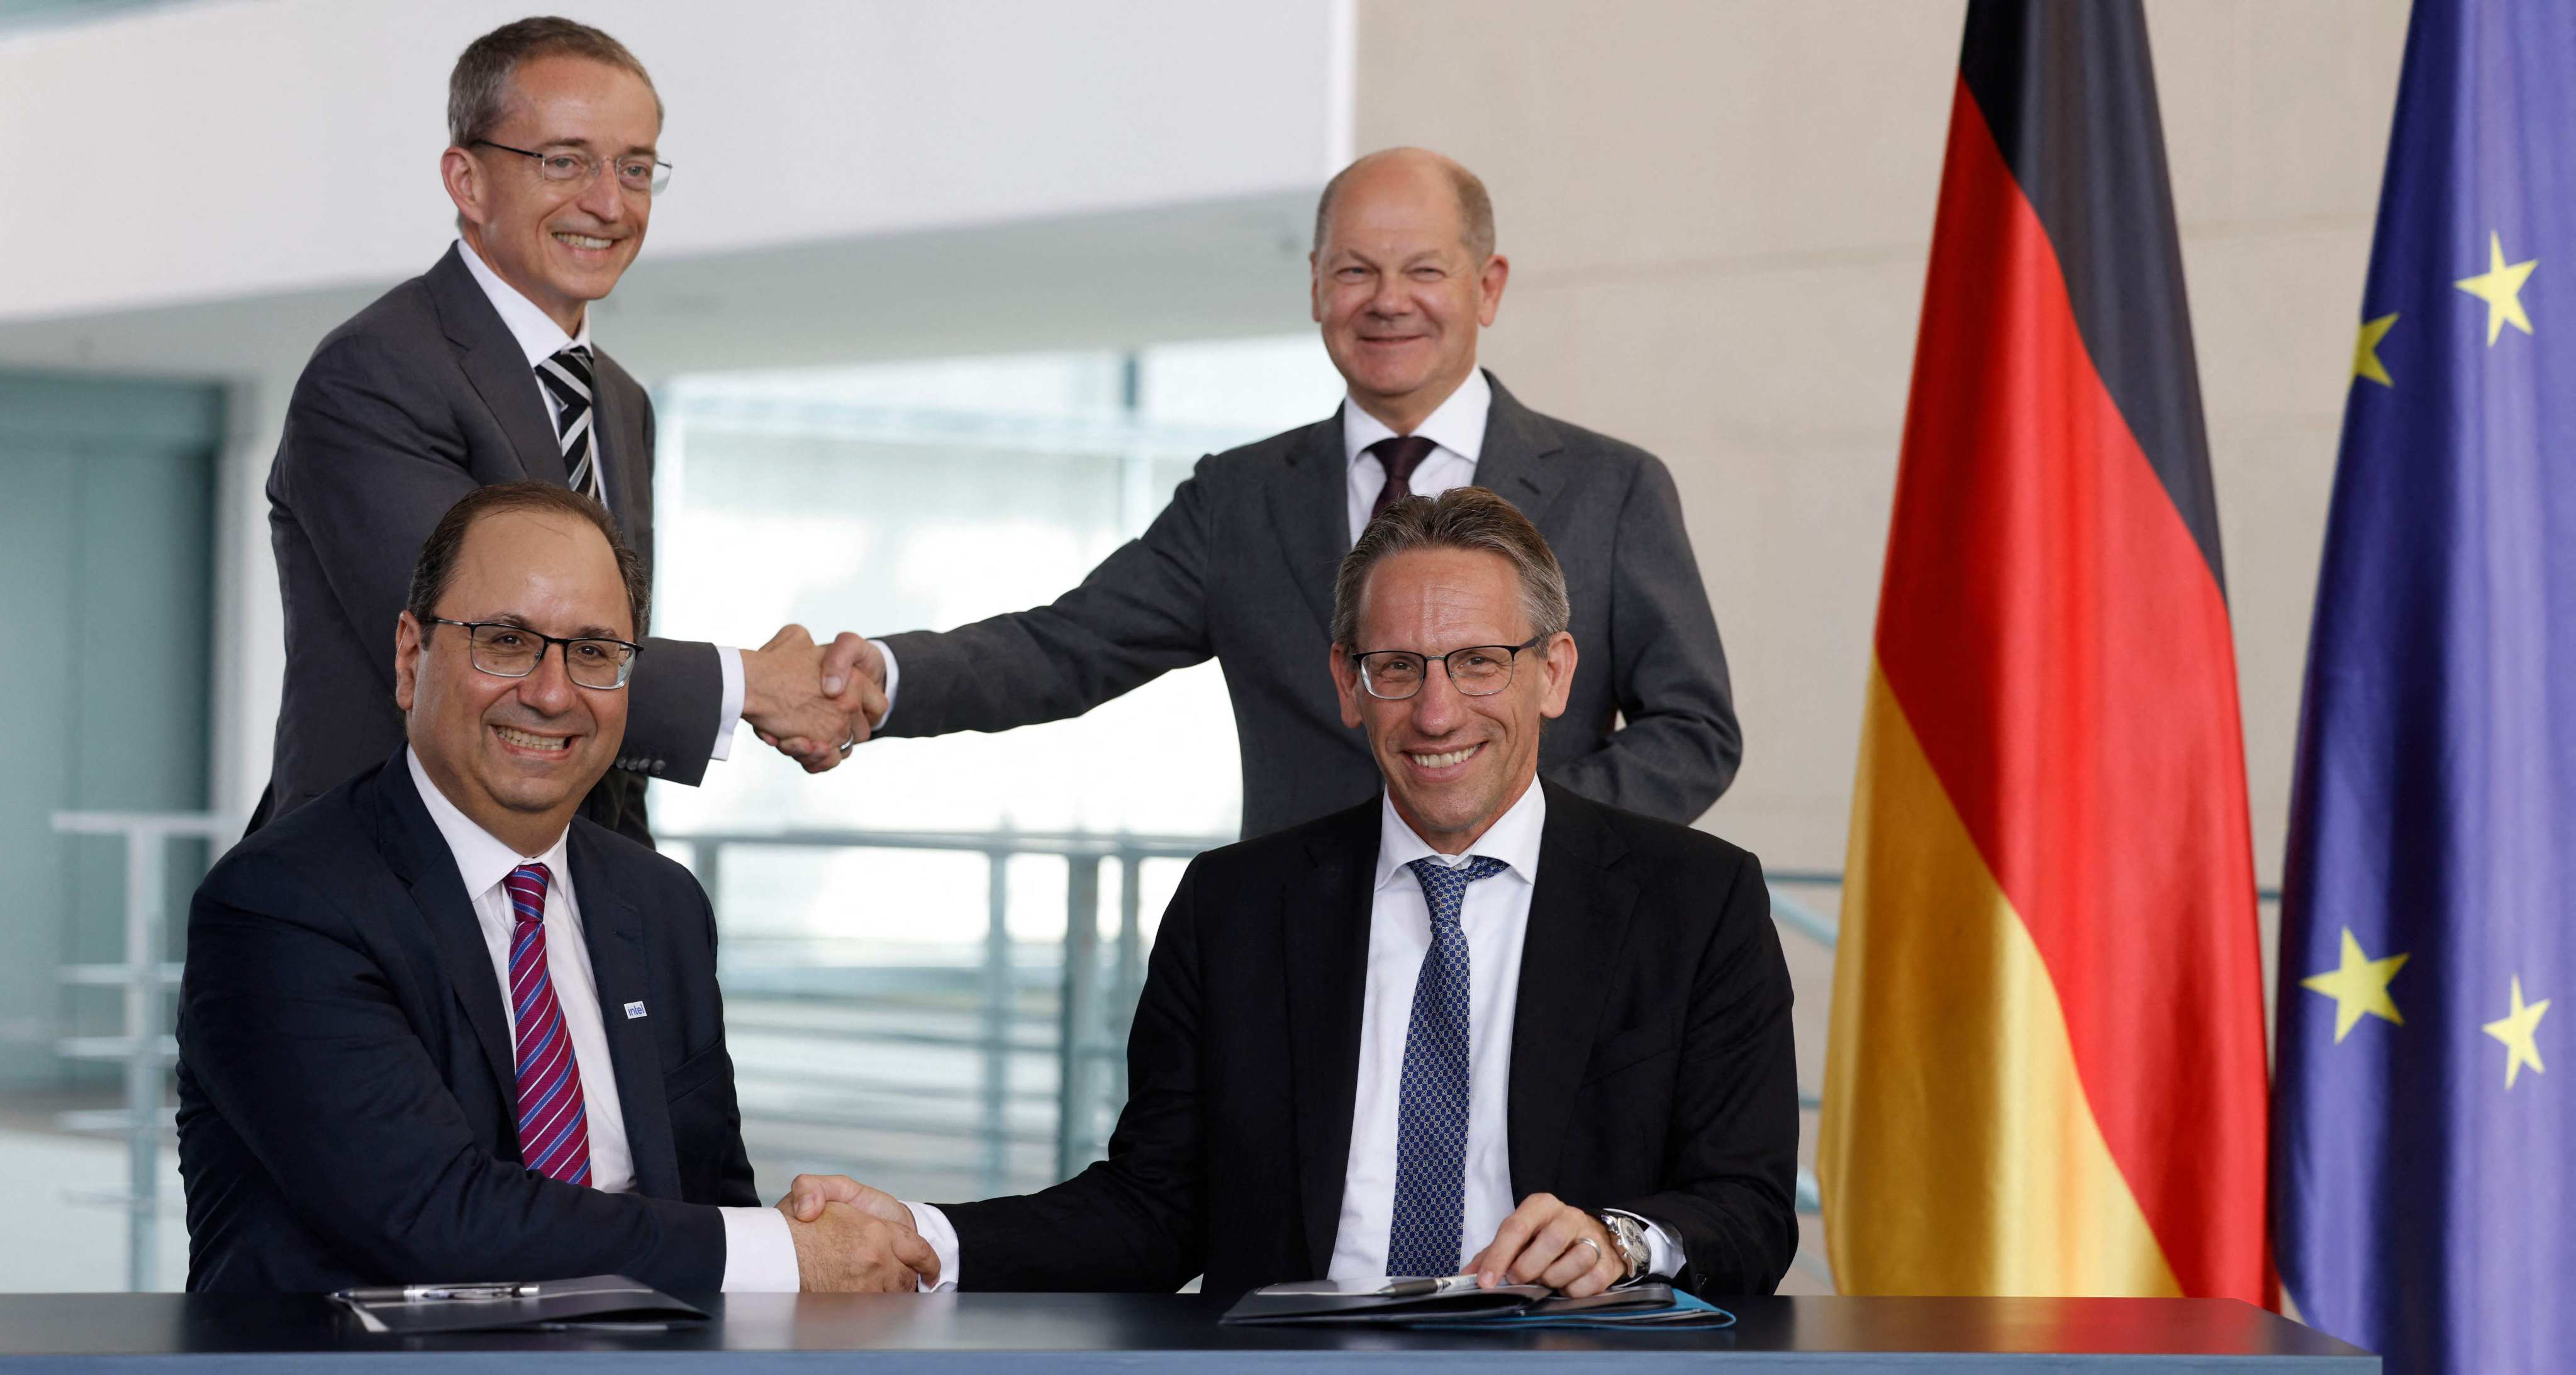 German Chancellor Olaf Scholz (background, right) shakes hands with Pat Gelsinger (background, left), CEO of US multinational corporation and technology company Intel, as State Secretary at the Chancellery Joerg Kukies (foreground, right) and Intel executive vice-president Keyvan Esfarjani (foreground, left) also shake hands after signing an agreement between the German government and Intel on June 19, 2023 at the Chancellery in Berlin. Photo: AFP